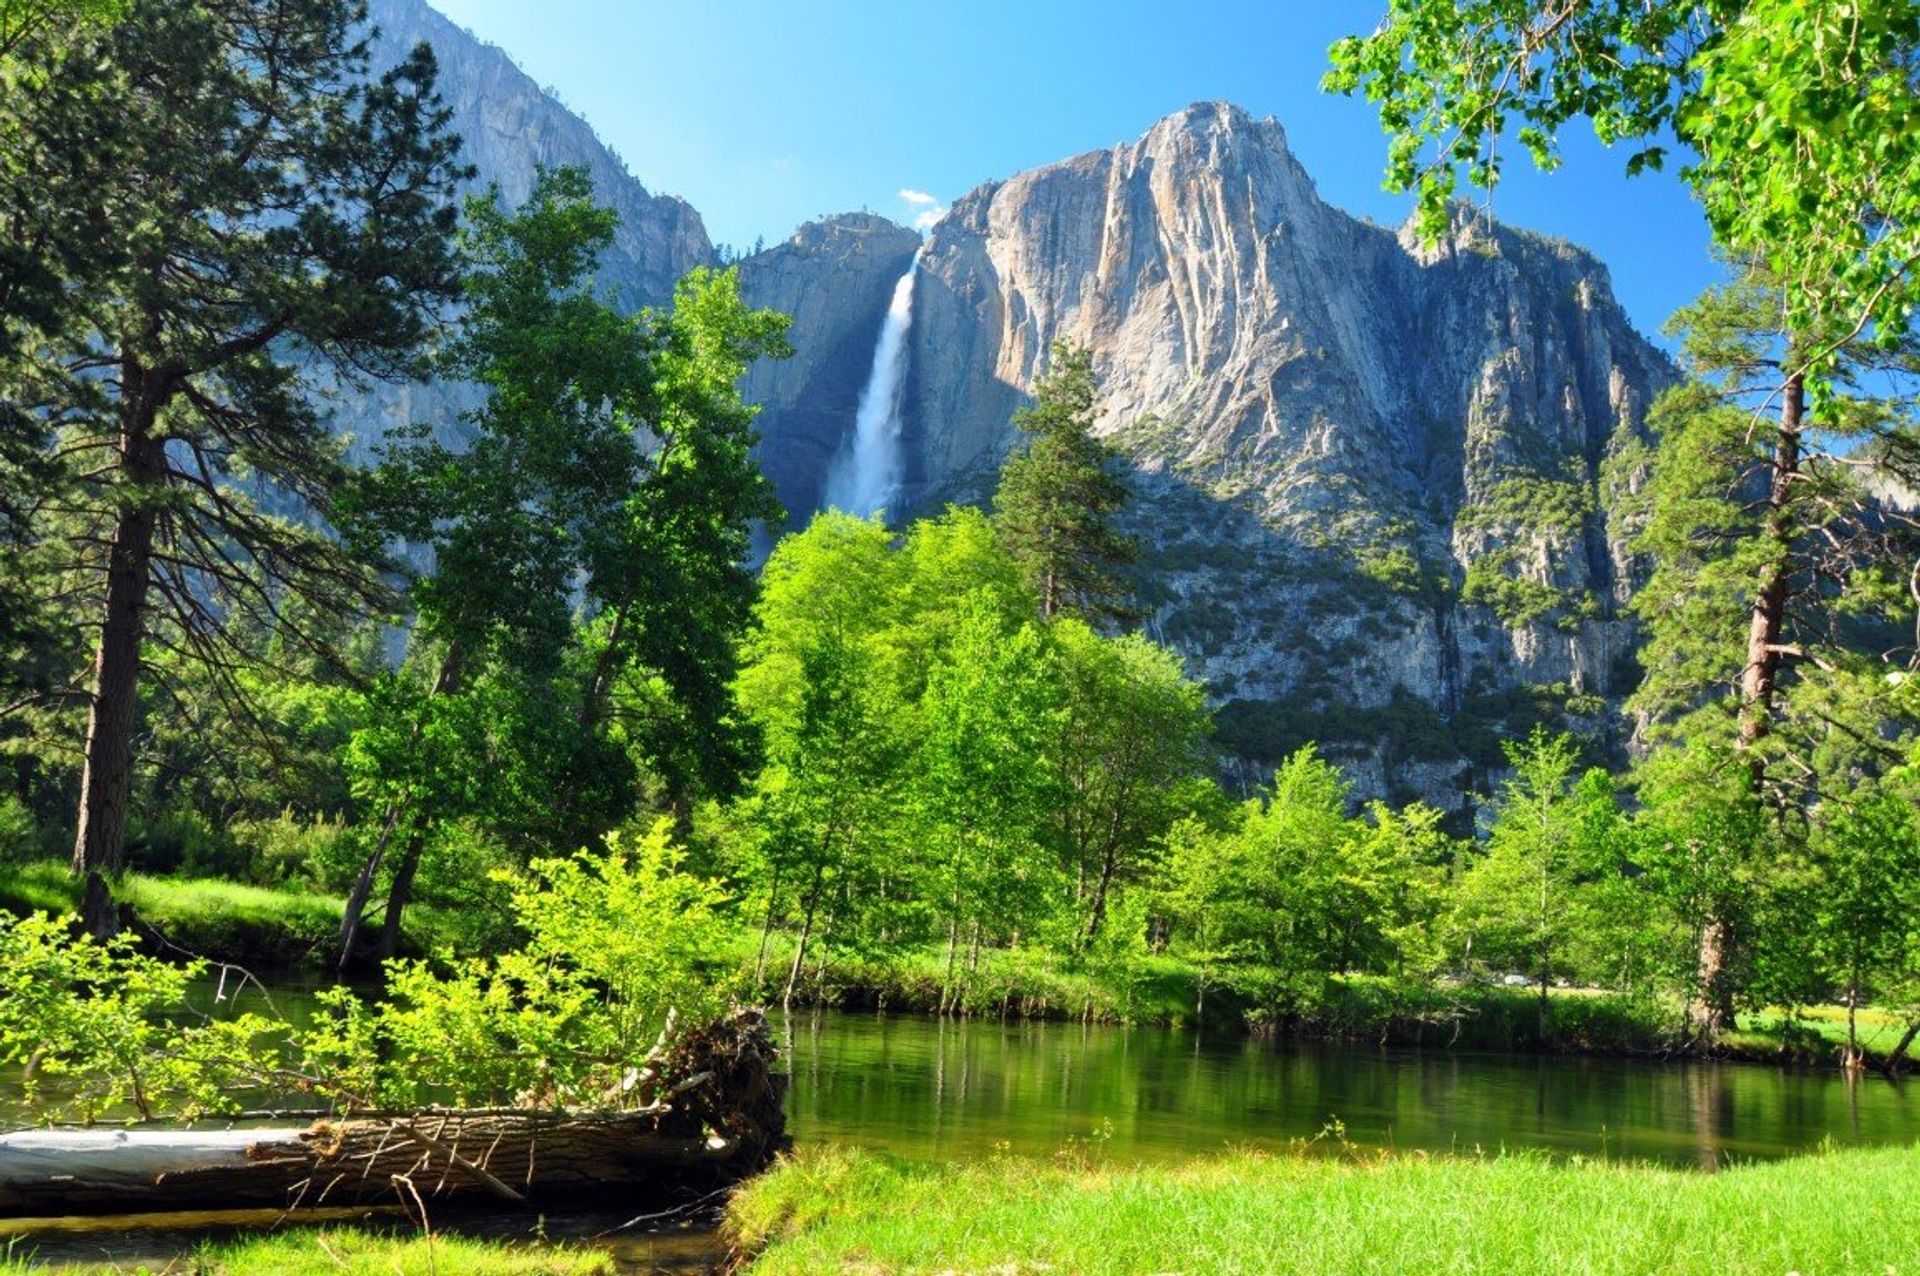 Yosemite National Park in California overlooks the stunning Sierra Nevada. The Ansel Adams Gallery is a must-see!